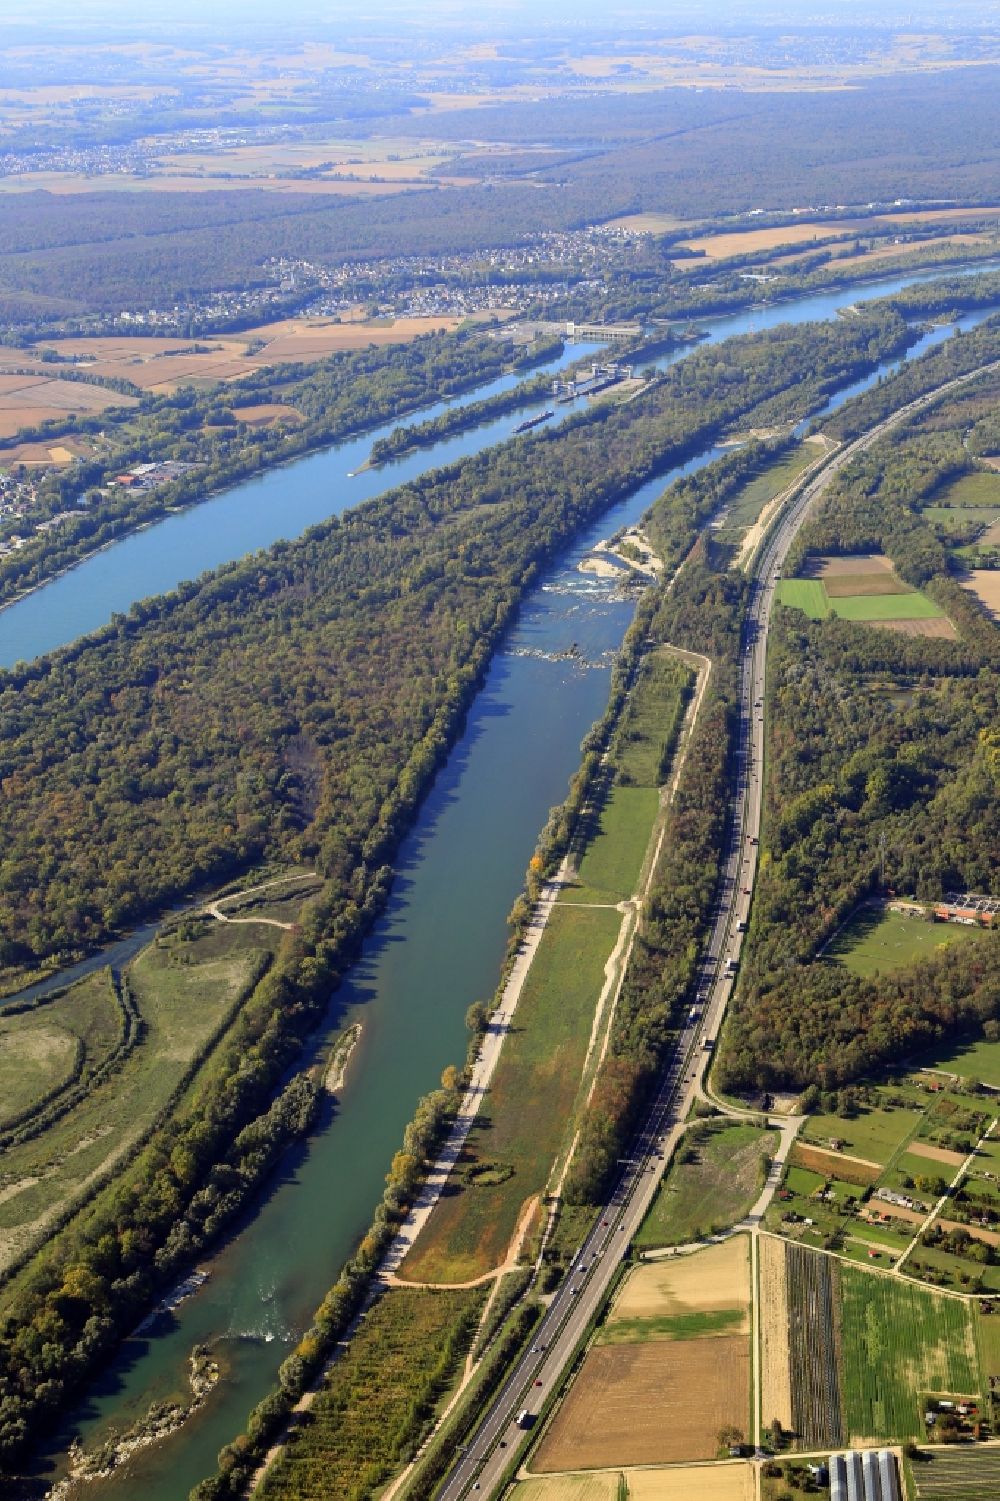 Aerial photograph Efringen-Kirchen - Popular nudist beach are the Isteiner thresholds in the river Rhine at the district Istein of Efringen-Kirchen in the state of Baden-Wuerttemberg. Parallel to the Upper Rhine (right) runs the Grand Canal of Alsace ( Grand Canal d'Alsace )